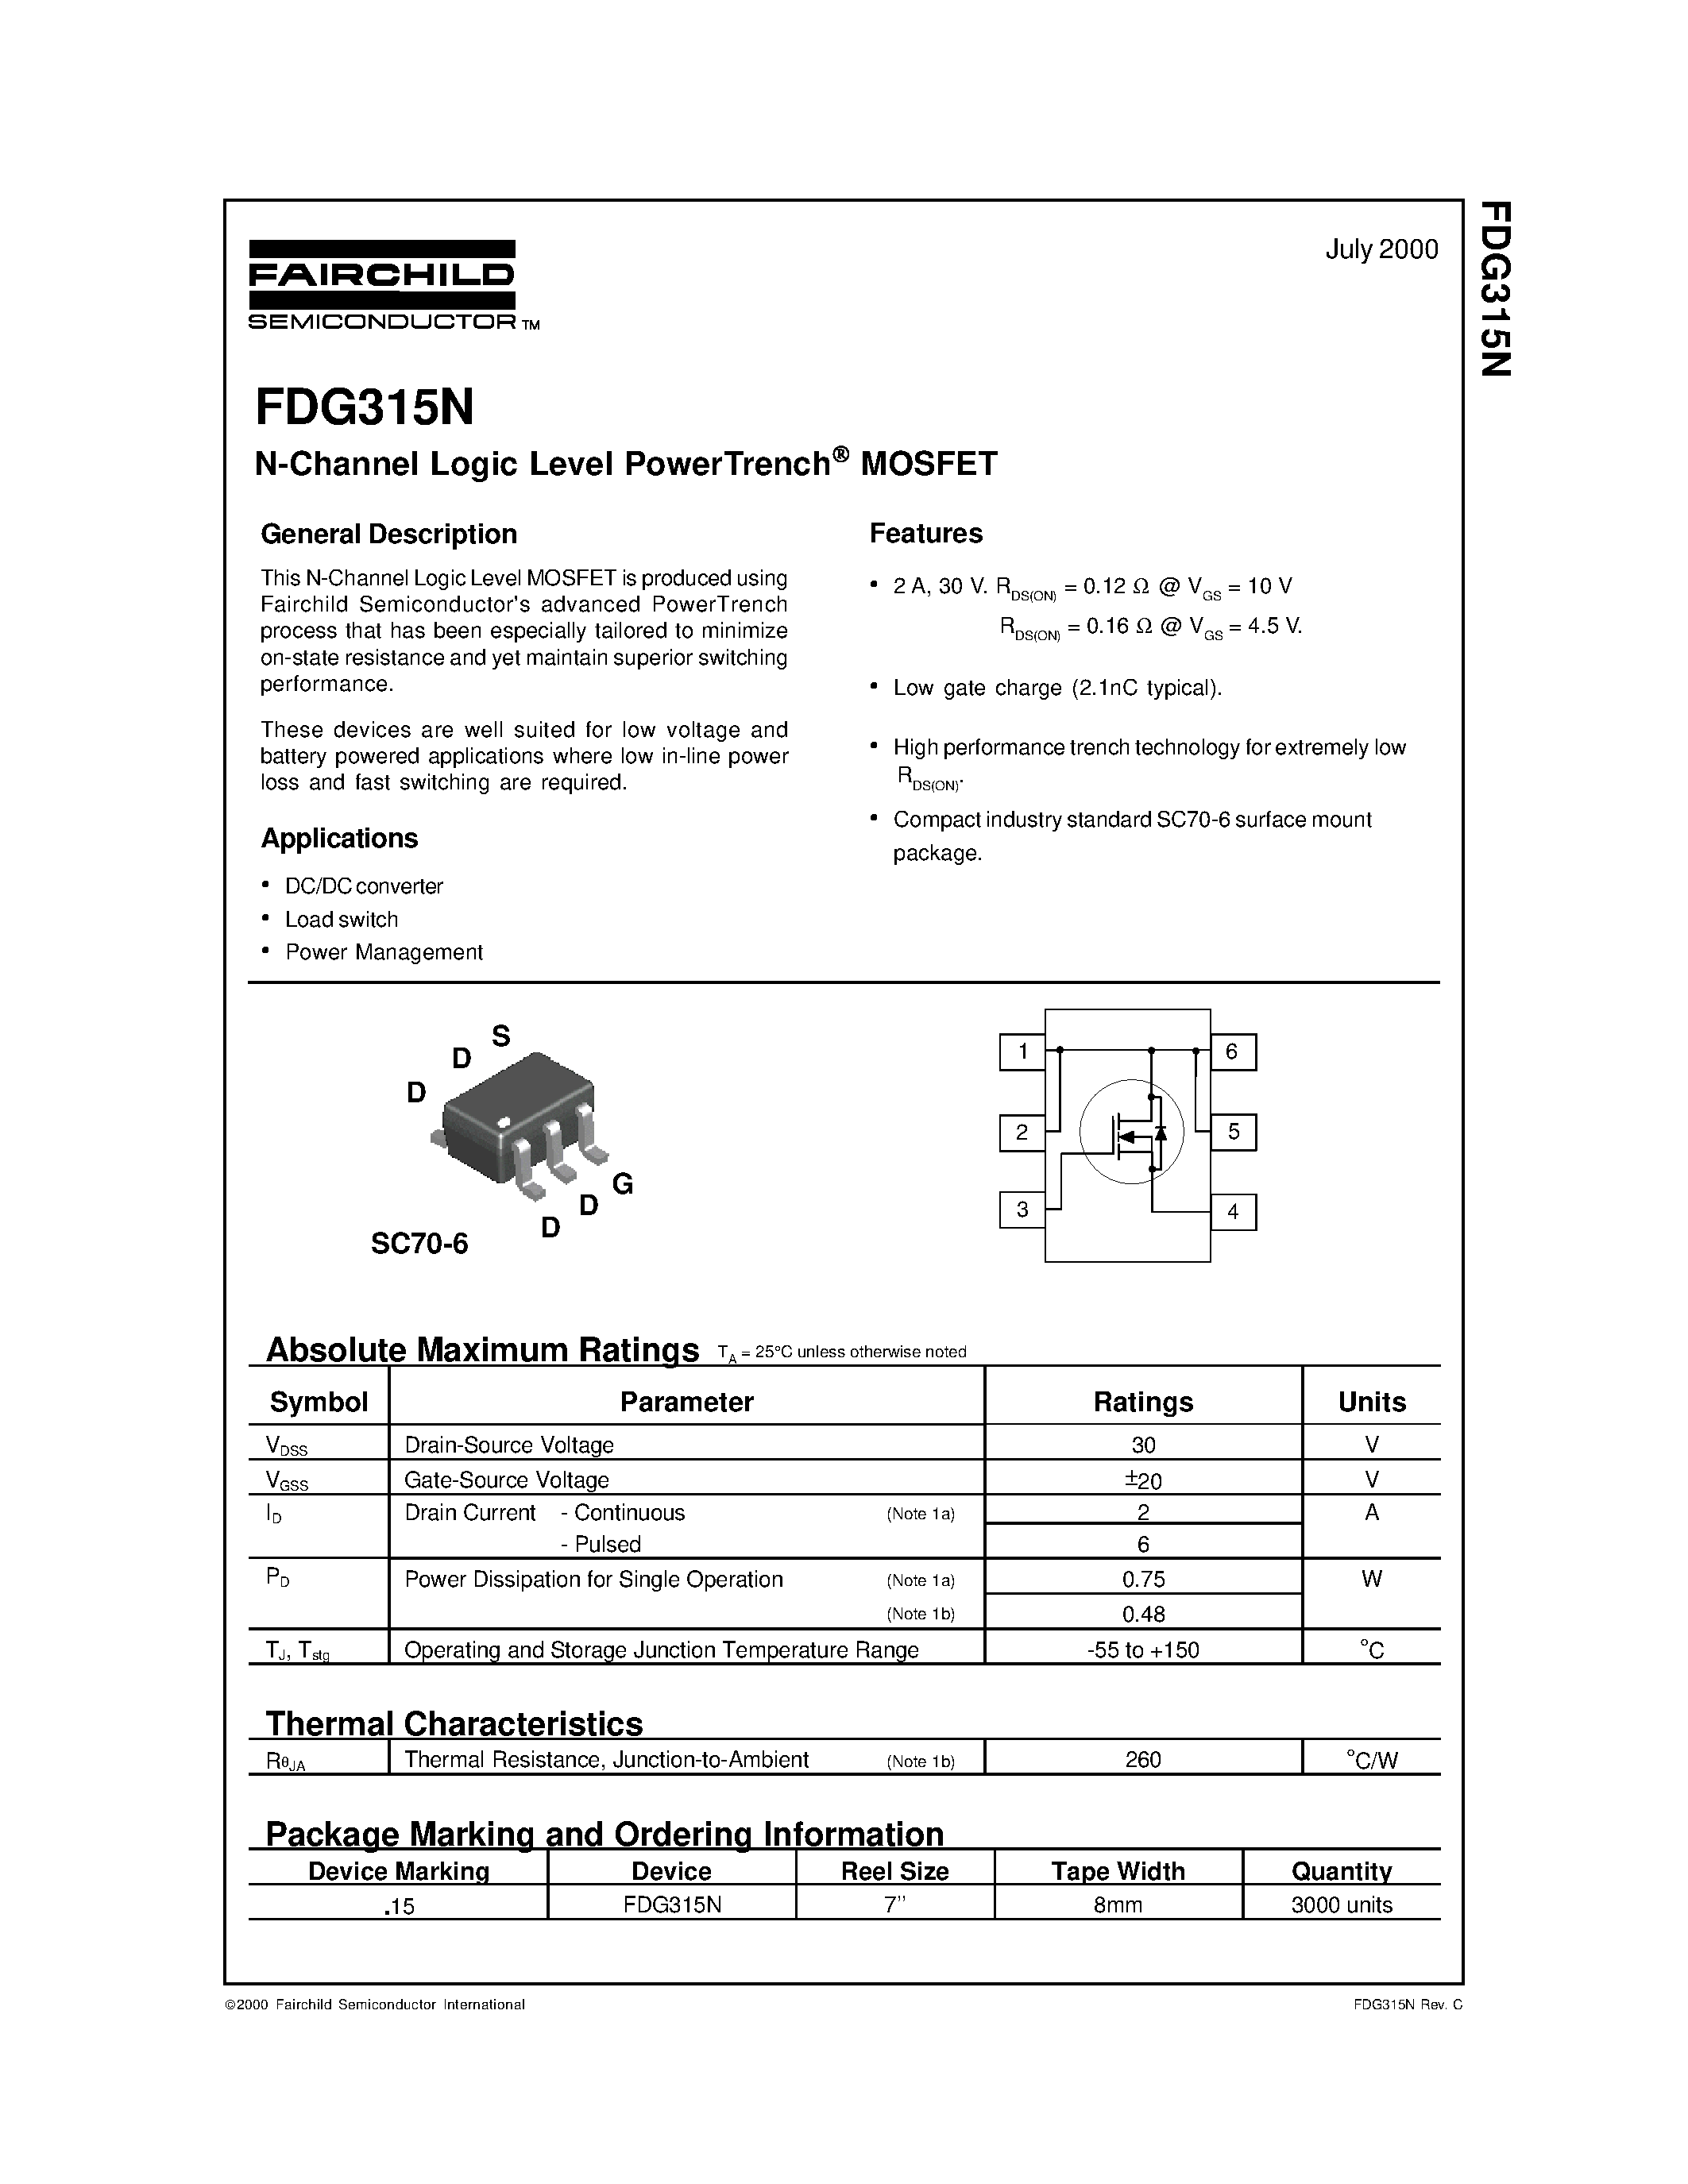 Даташит FDG315N - N-Channel Logic Level PowerTrench MOSFET страница 1